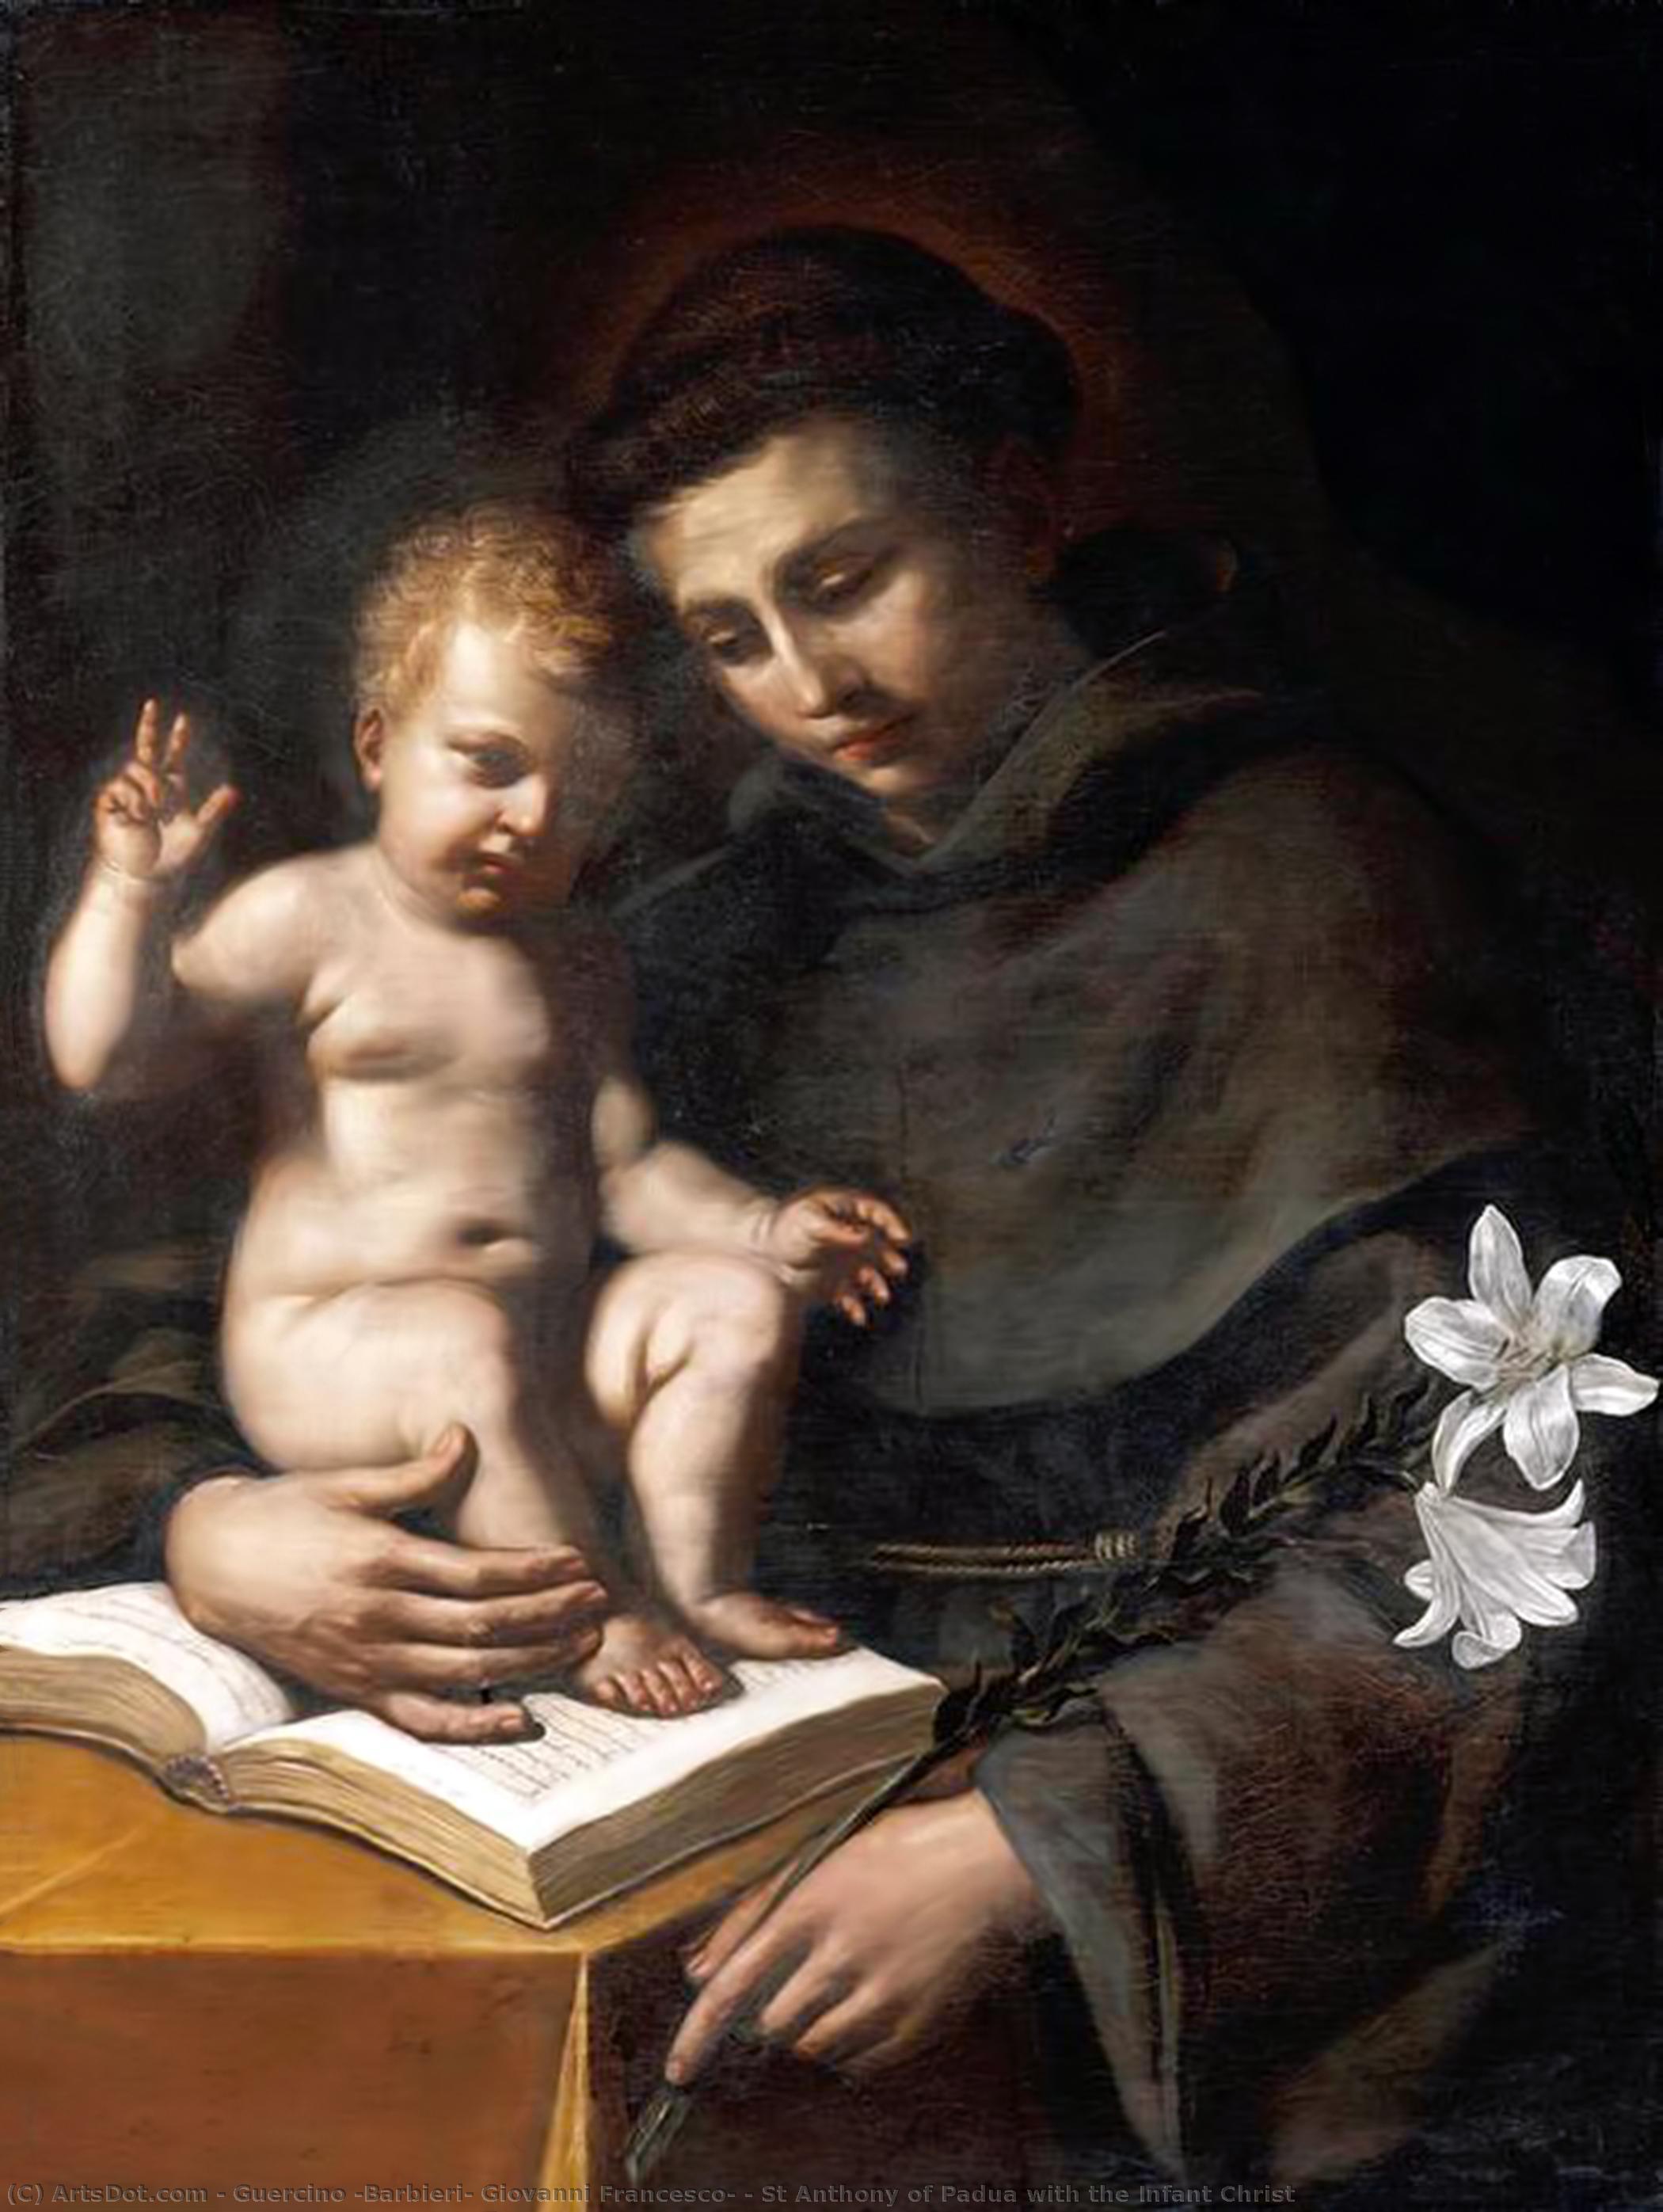 WikiOO.org - 백과 사전 - 회화, 삽화 Guercino (Barbieri, Giovanni Francesco) - St Anthony of Padua with the Infant Christ